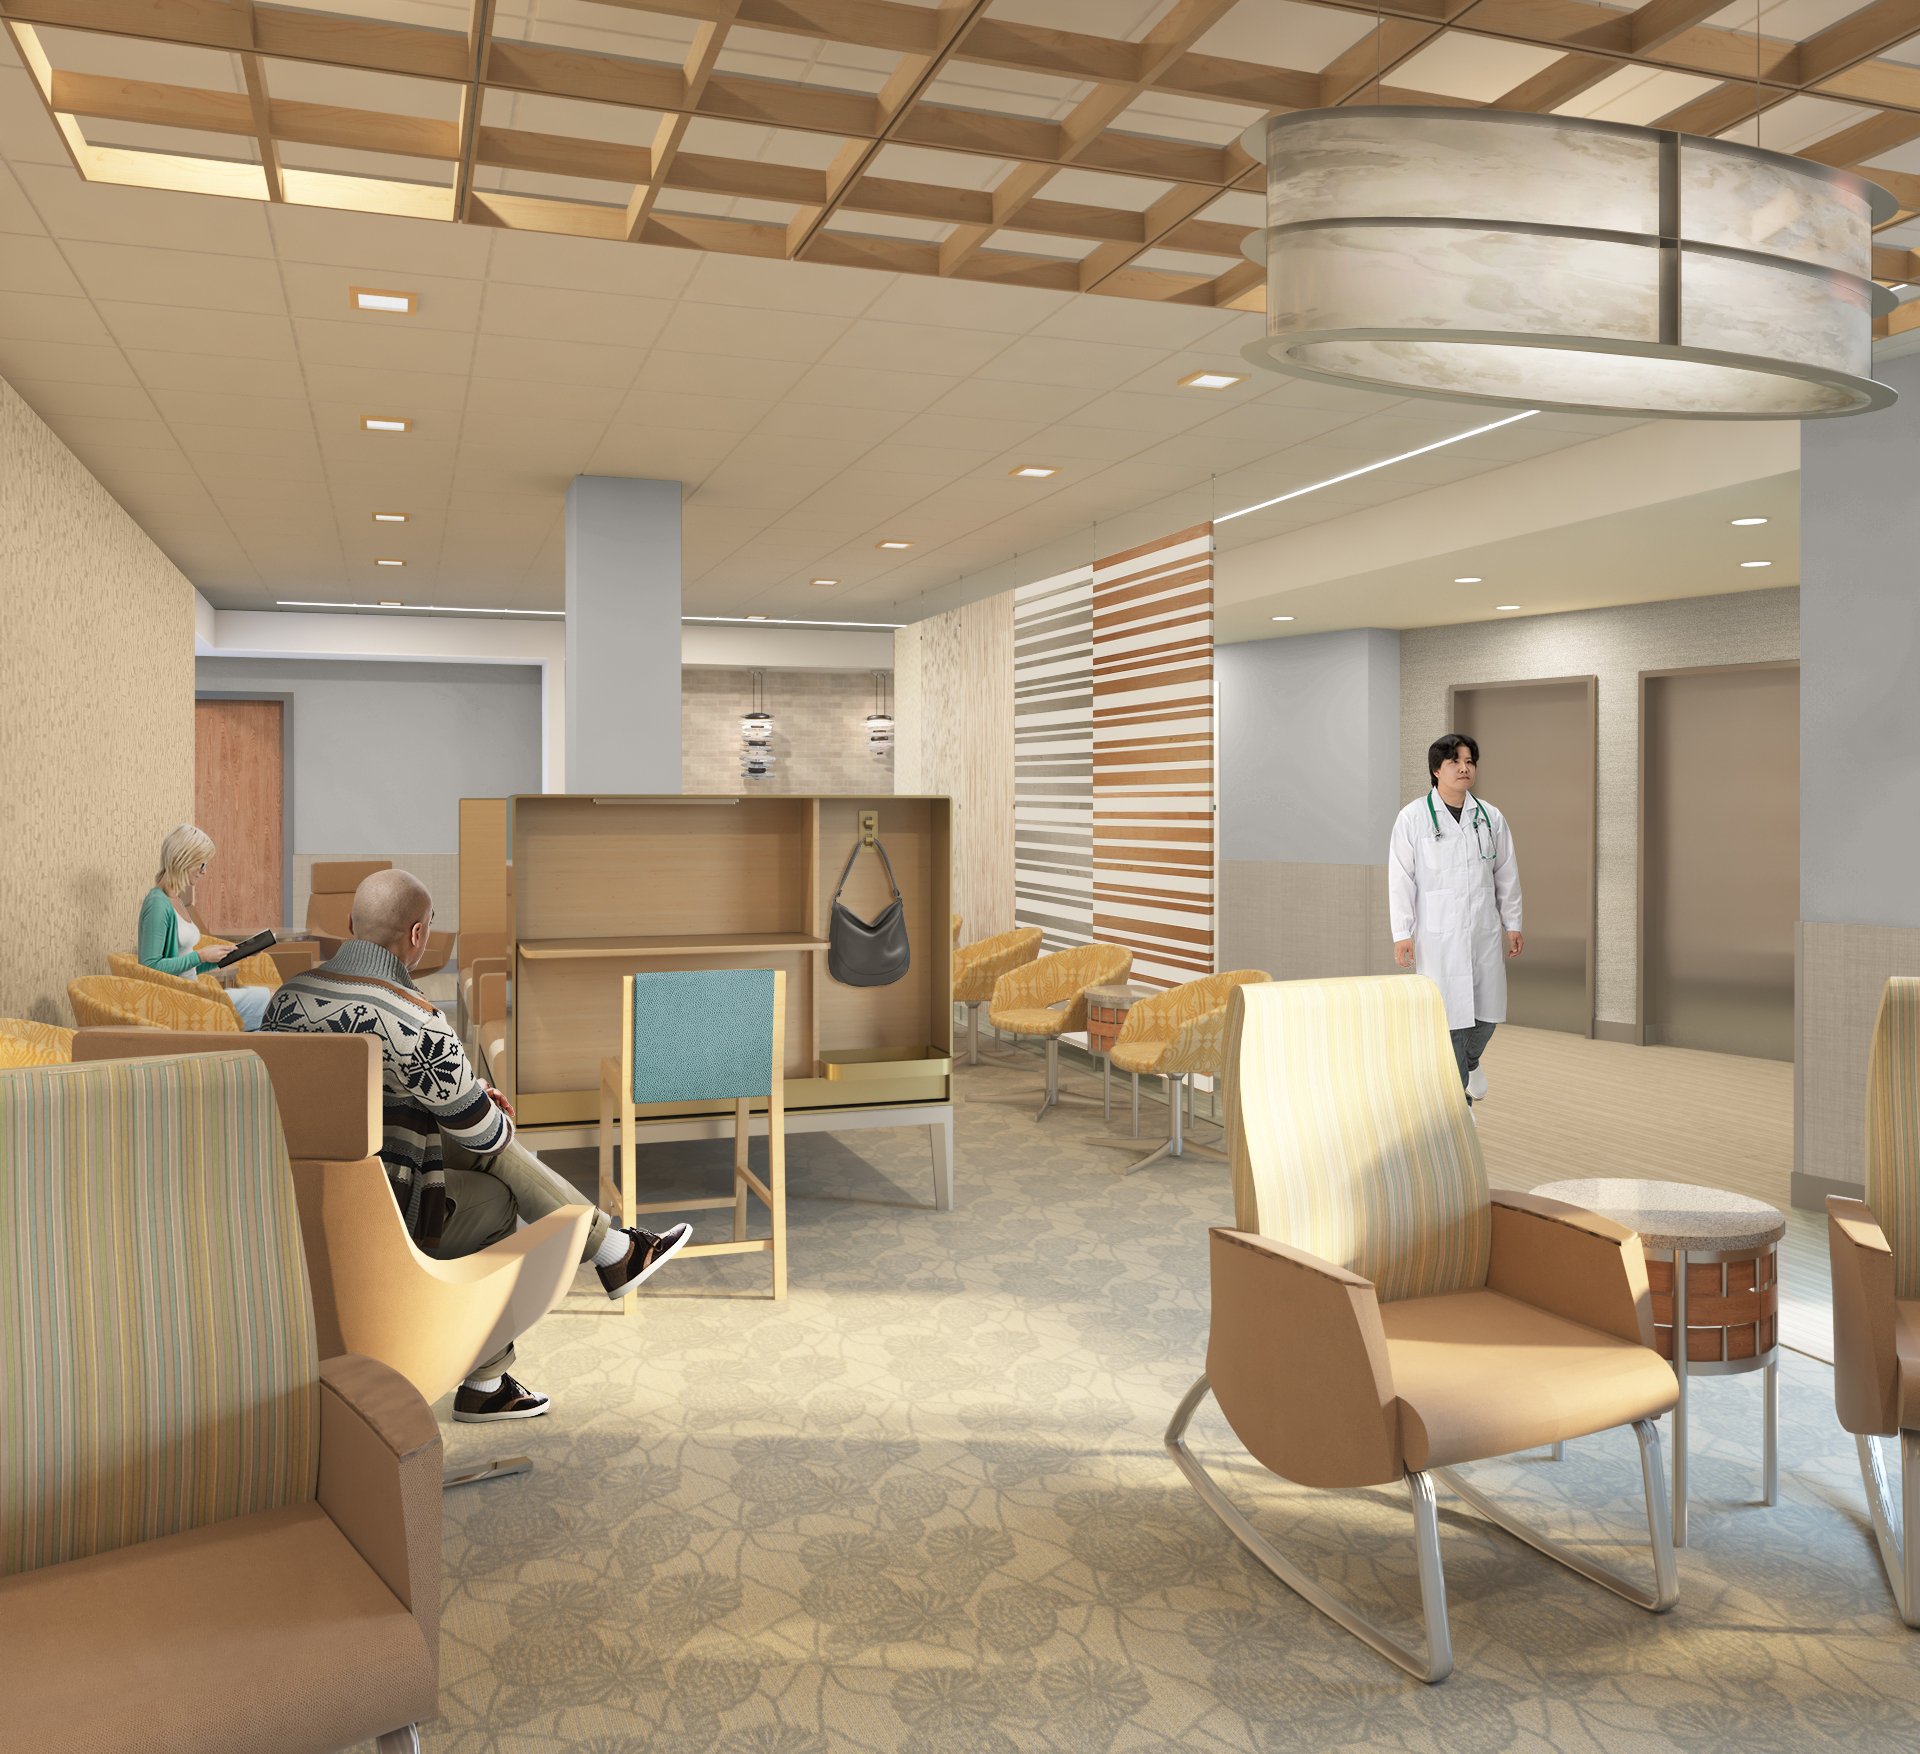 Rendering of a Doctor's Waiting Room